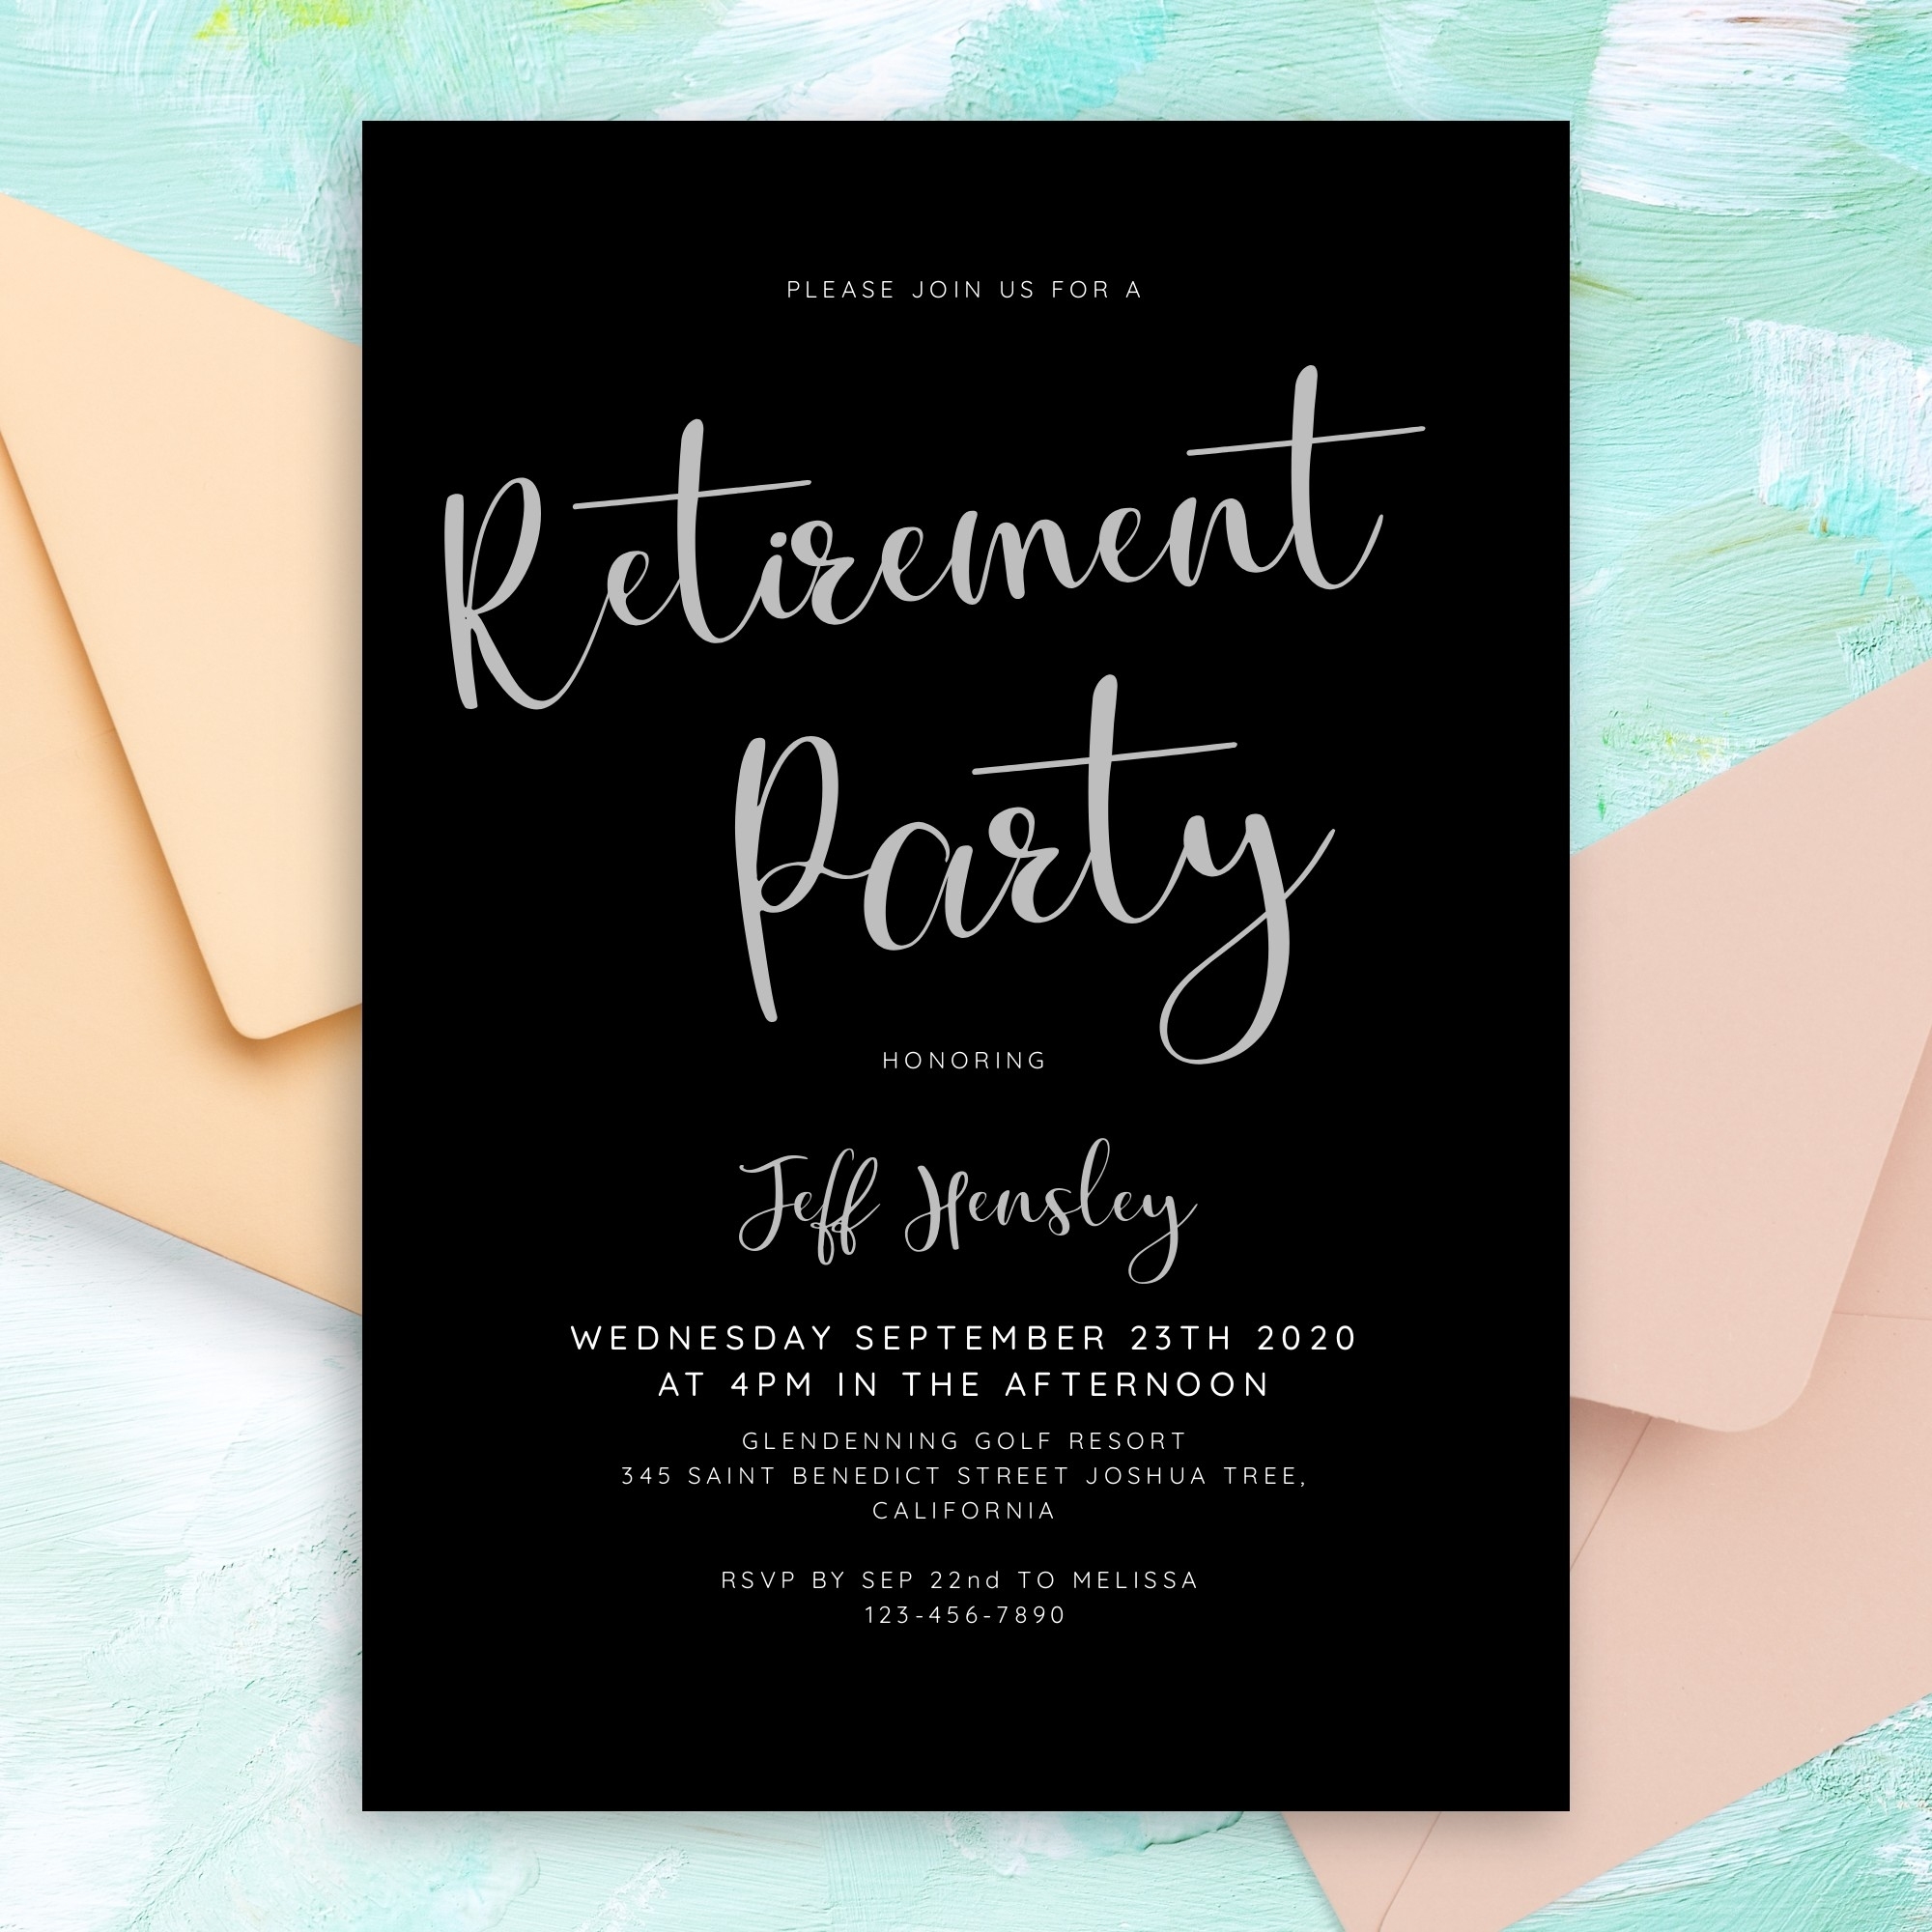 Modern Black And White Retirement Party Invitation Template Online Maker Within Event Invitation Card Template